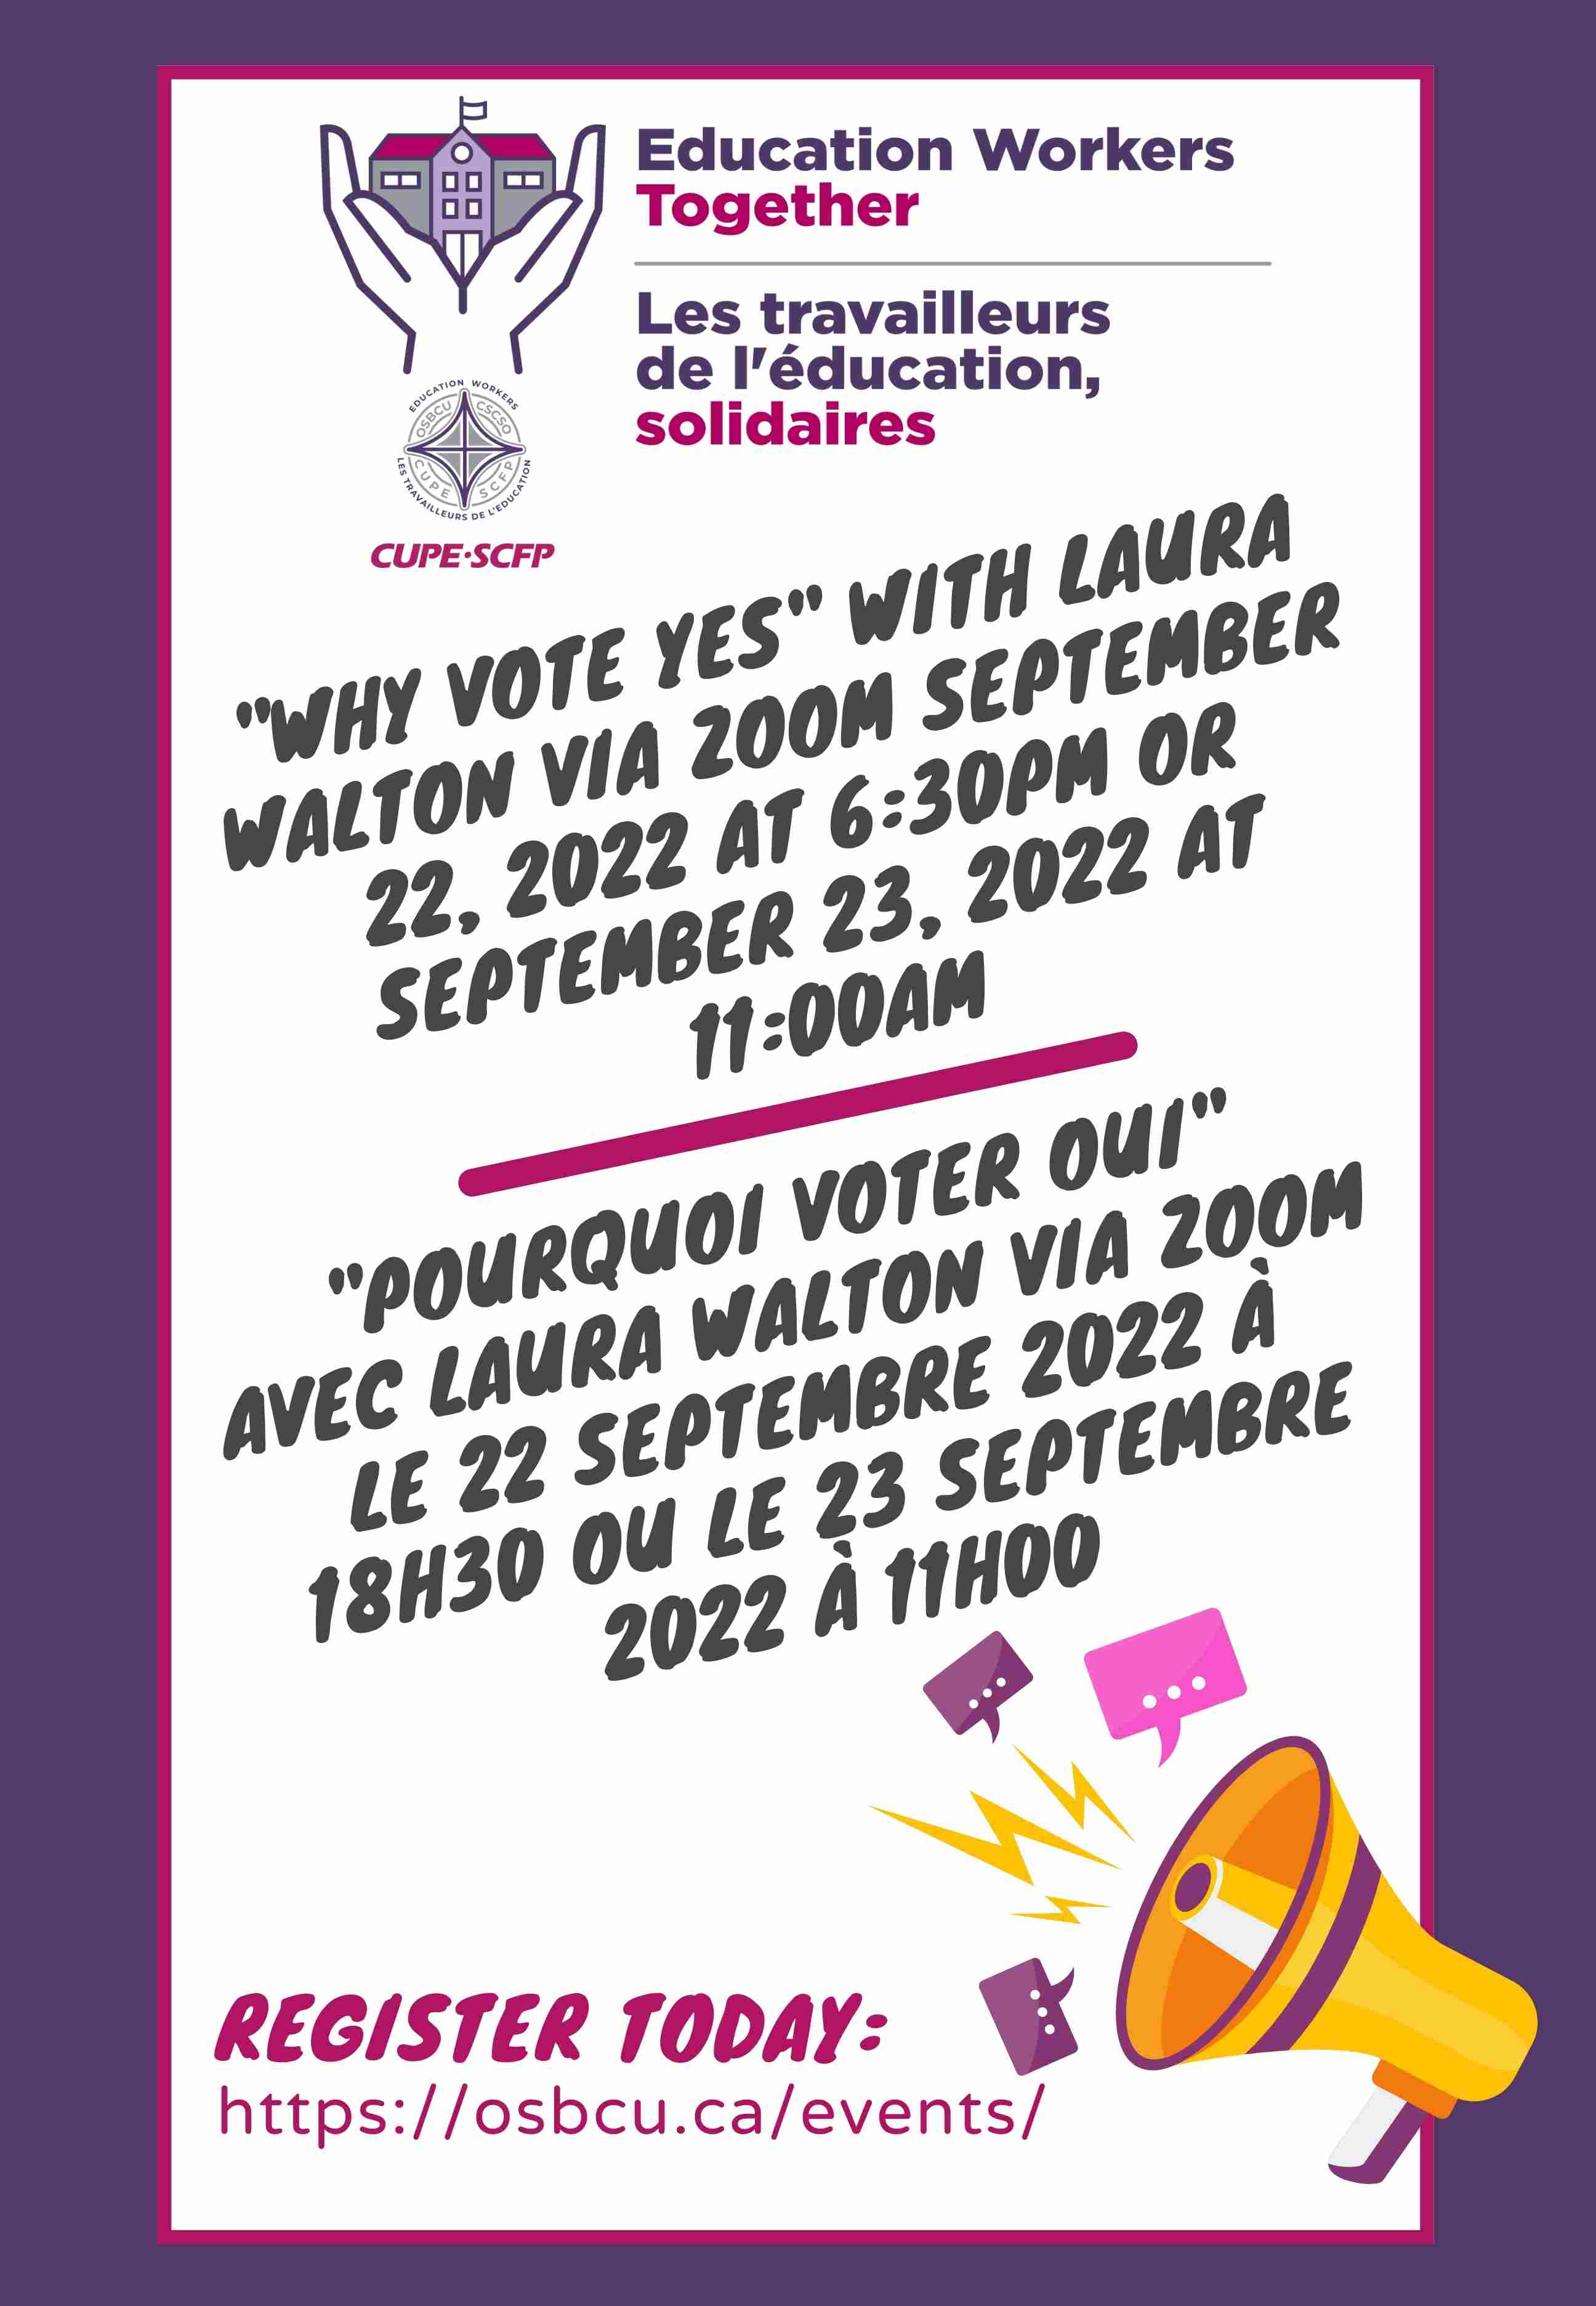 22 September 2022 Why Vote Yes with Laura Walton